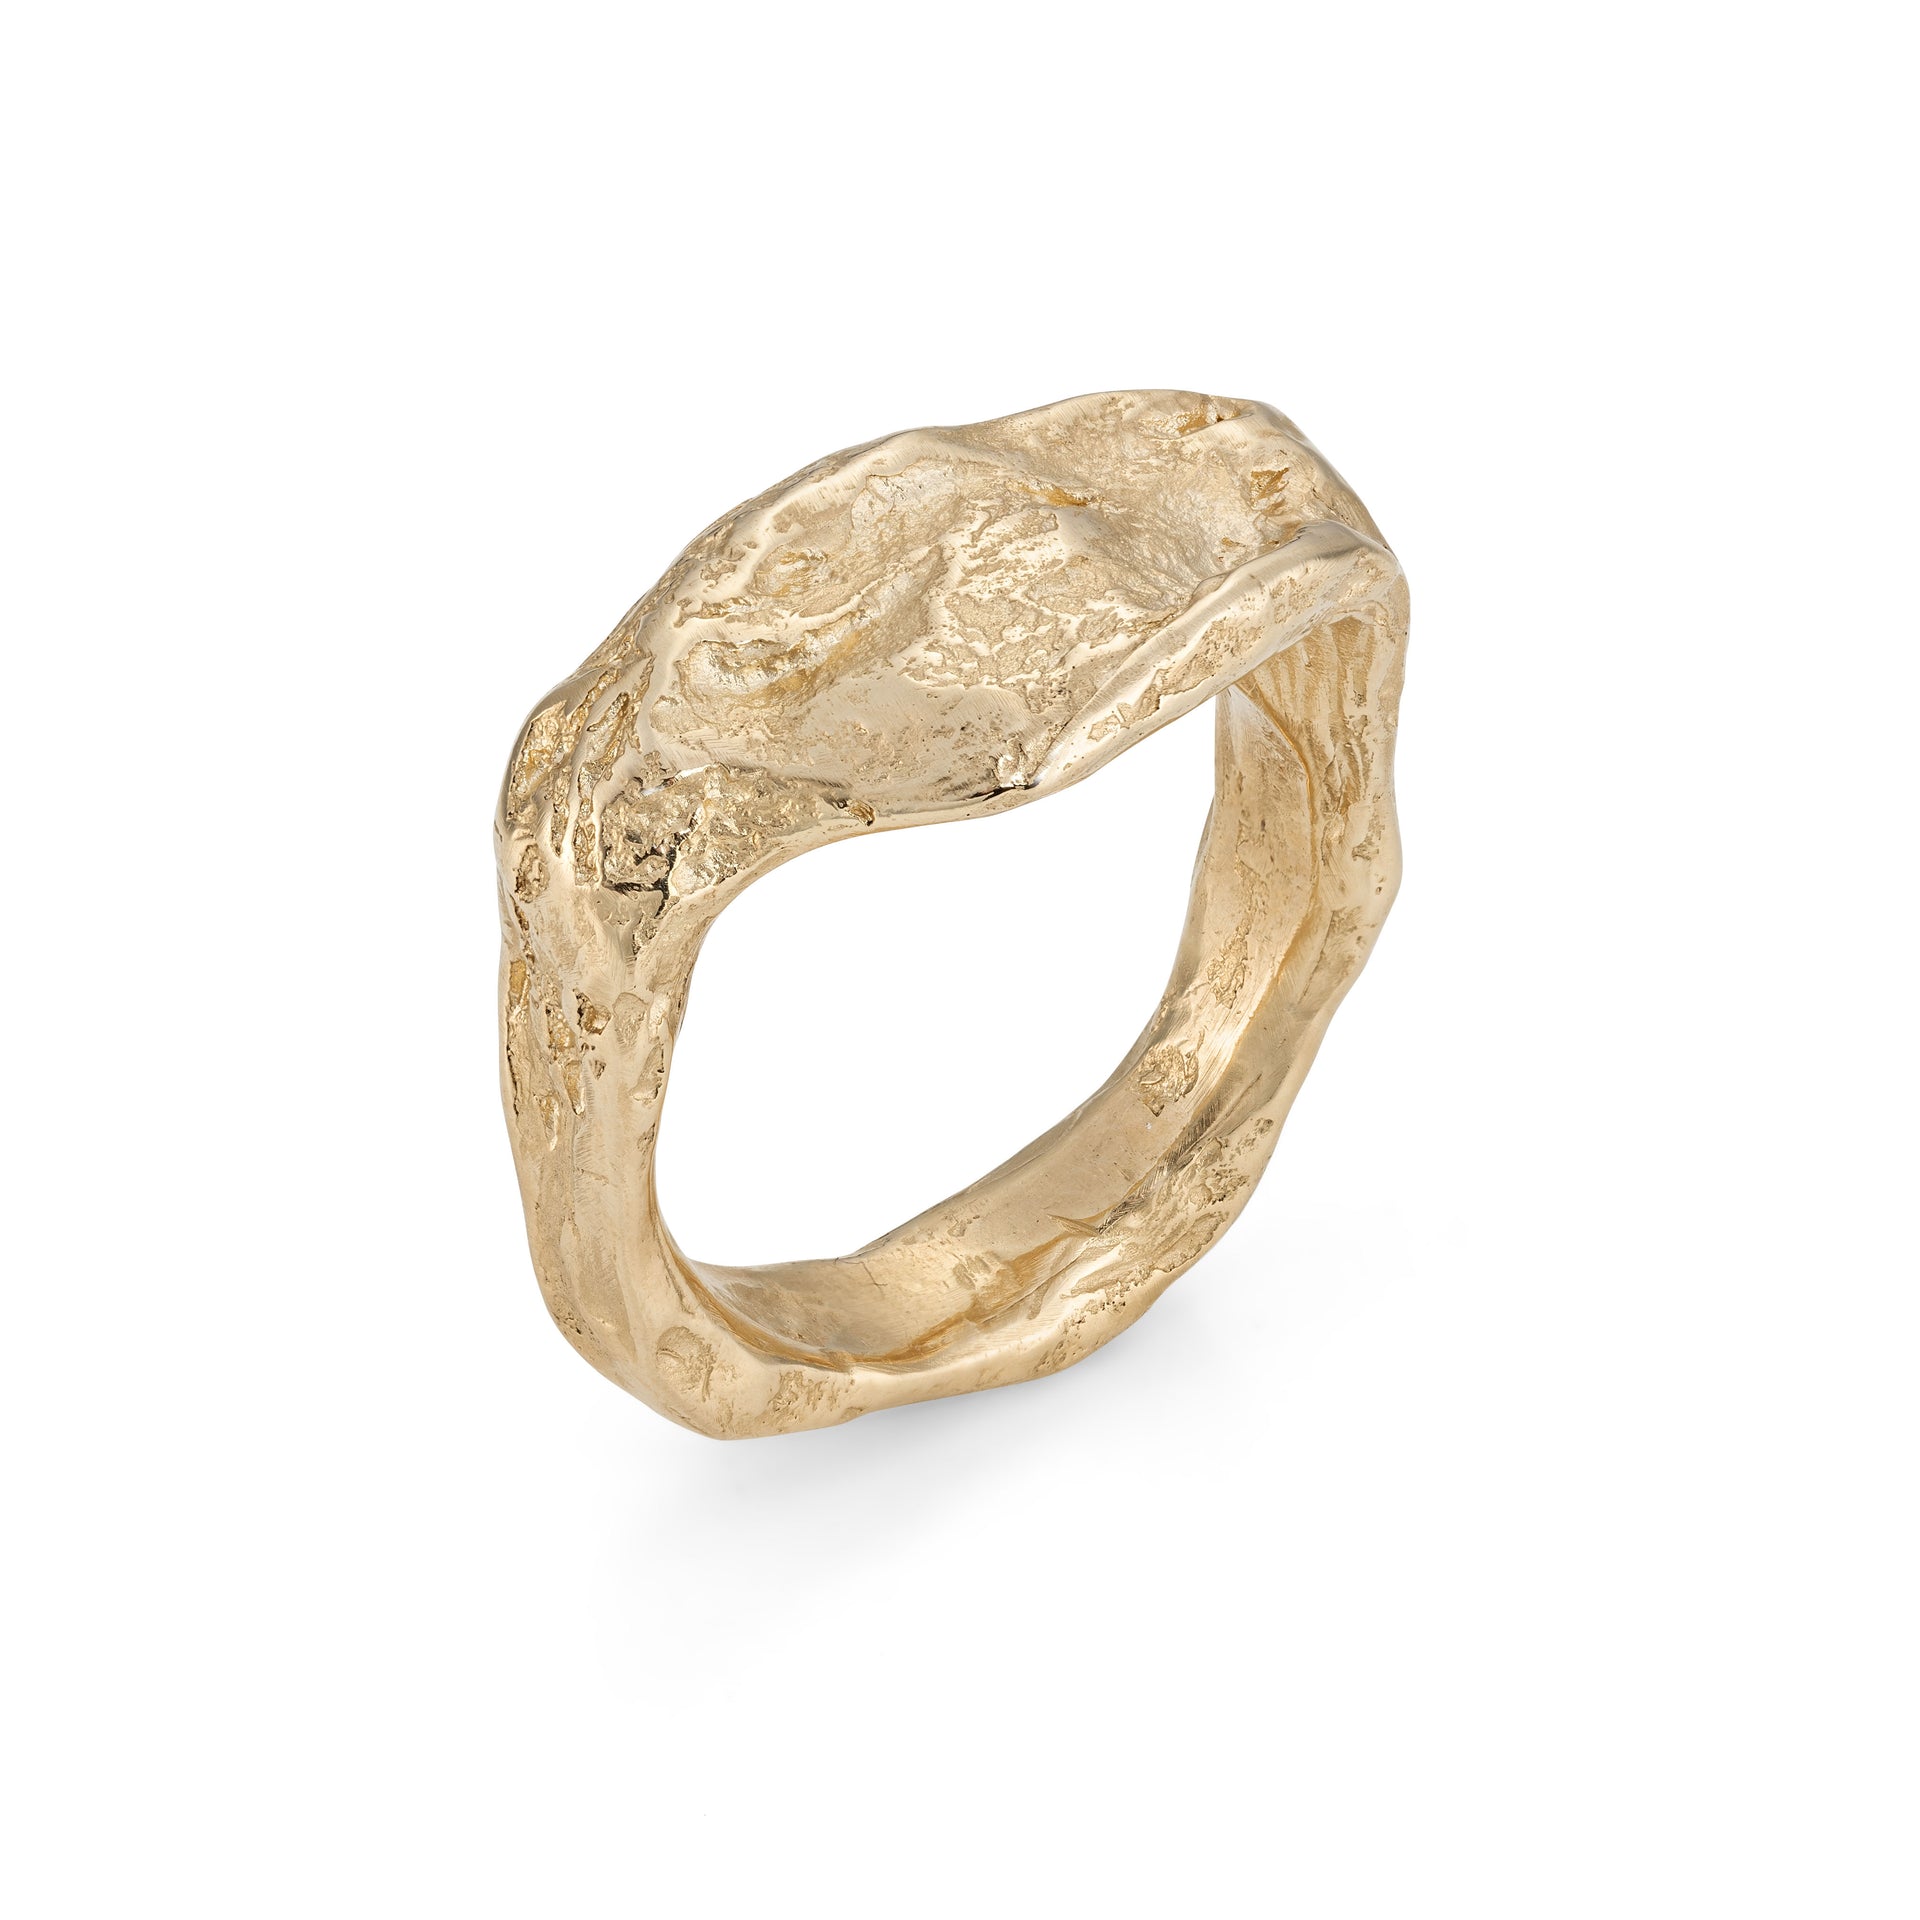 Gold textured signet ring. Handmade in Cornwall using 100% recycled gold. 